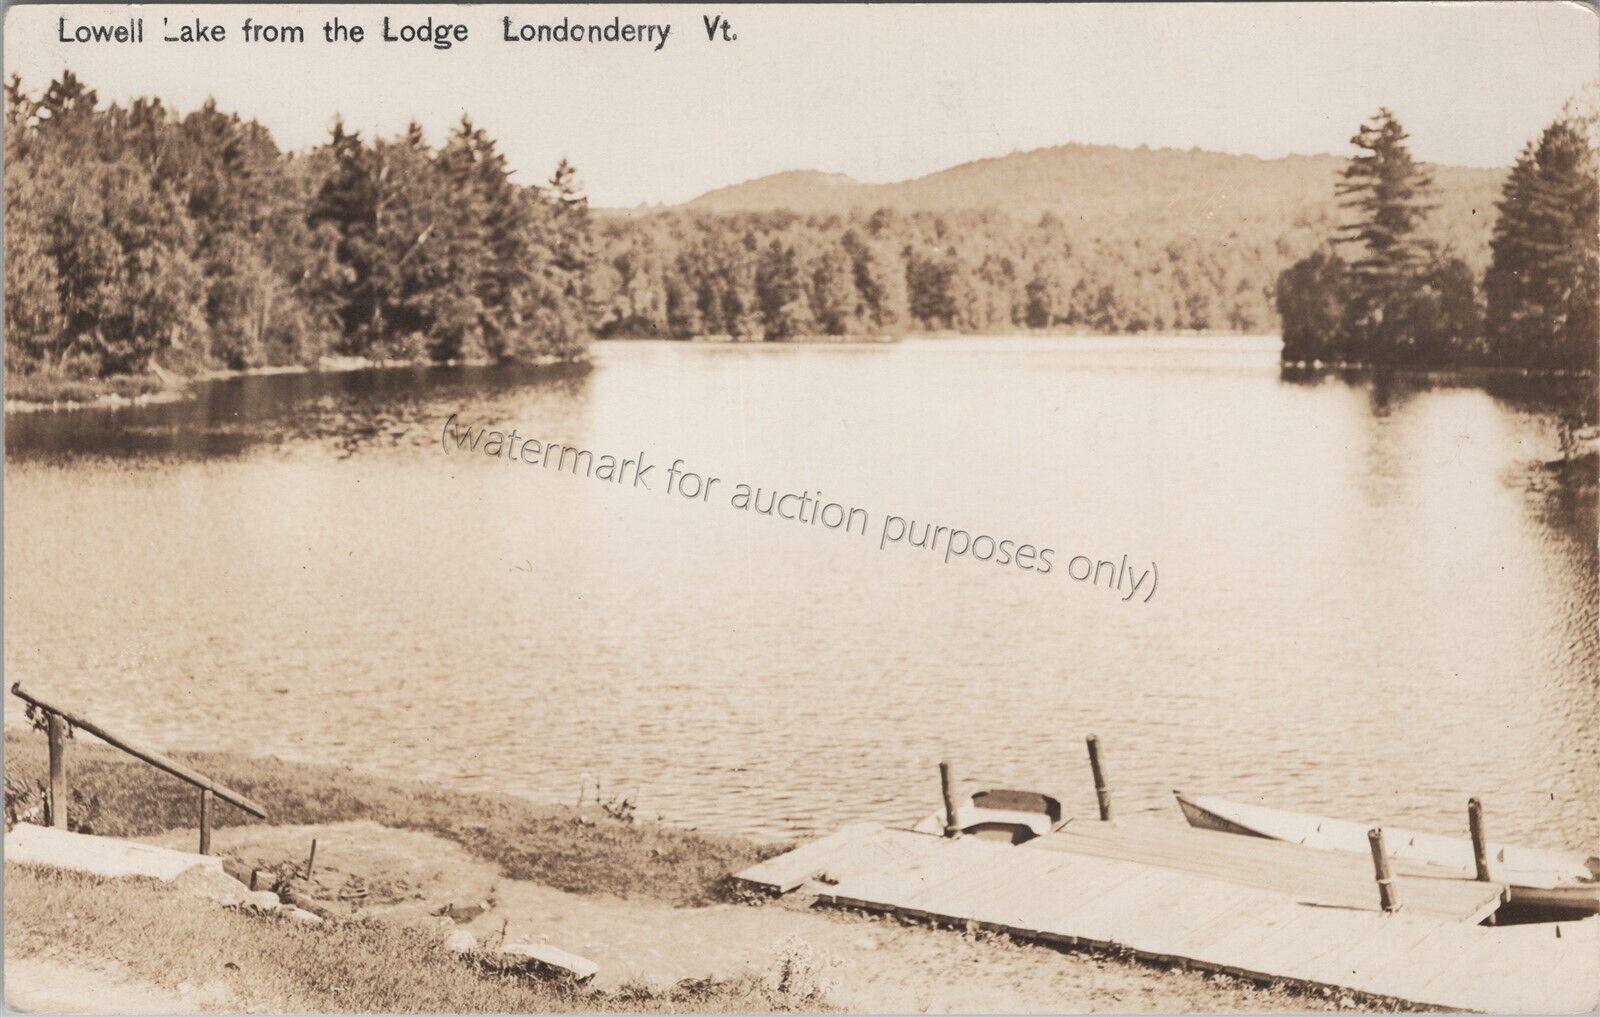 Londonderry, VT: RPPC Lowell Lake Lodge - Vintage Vermont Real Photo Postcard